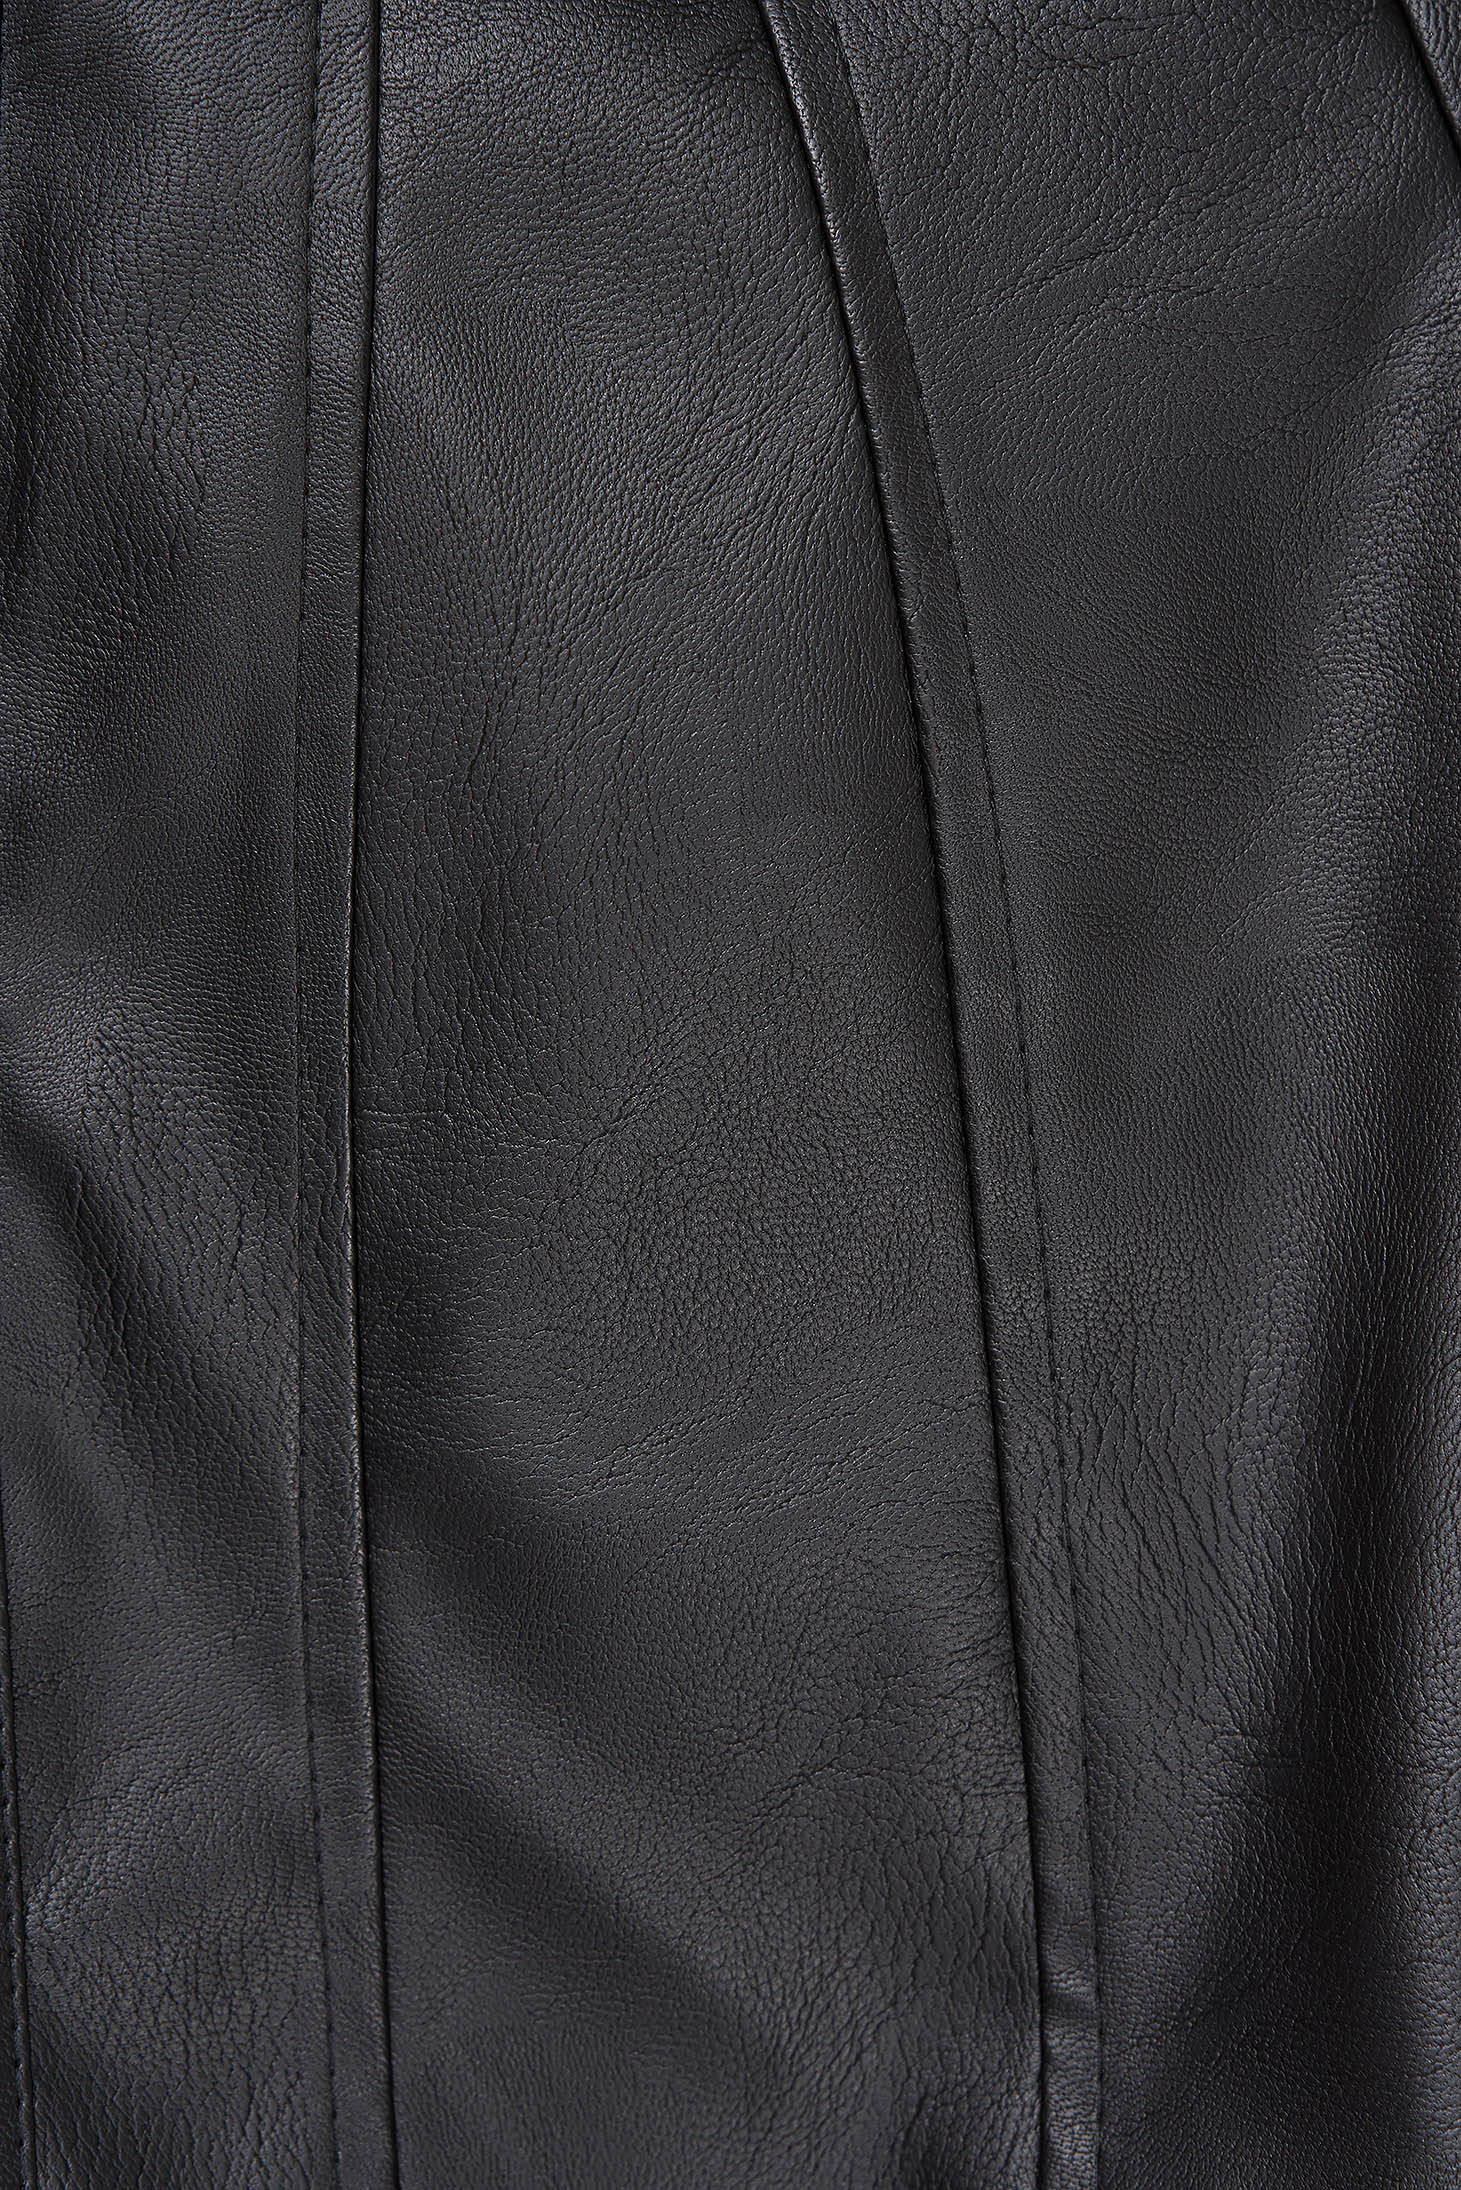 Thin Black Faux Leather Jacket, Unlined and Tailored - SunShine 5 - StarShinerS.com